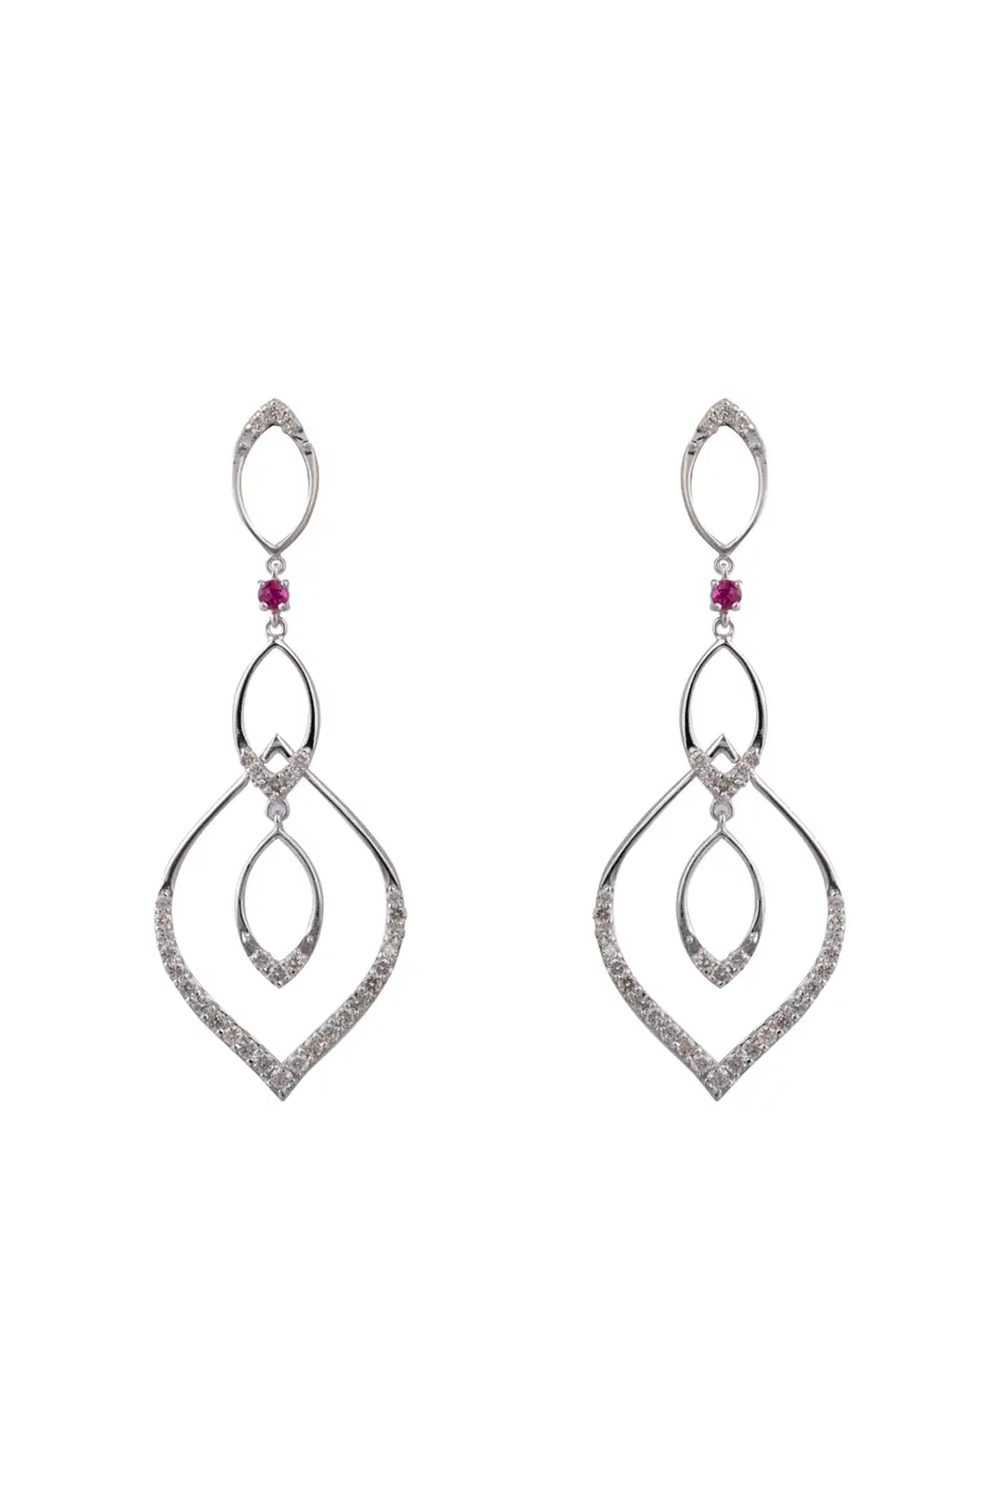 18k gold Diamond and Ruby Earring with 1.12 carats of diamonds